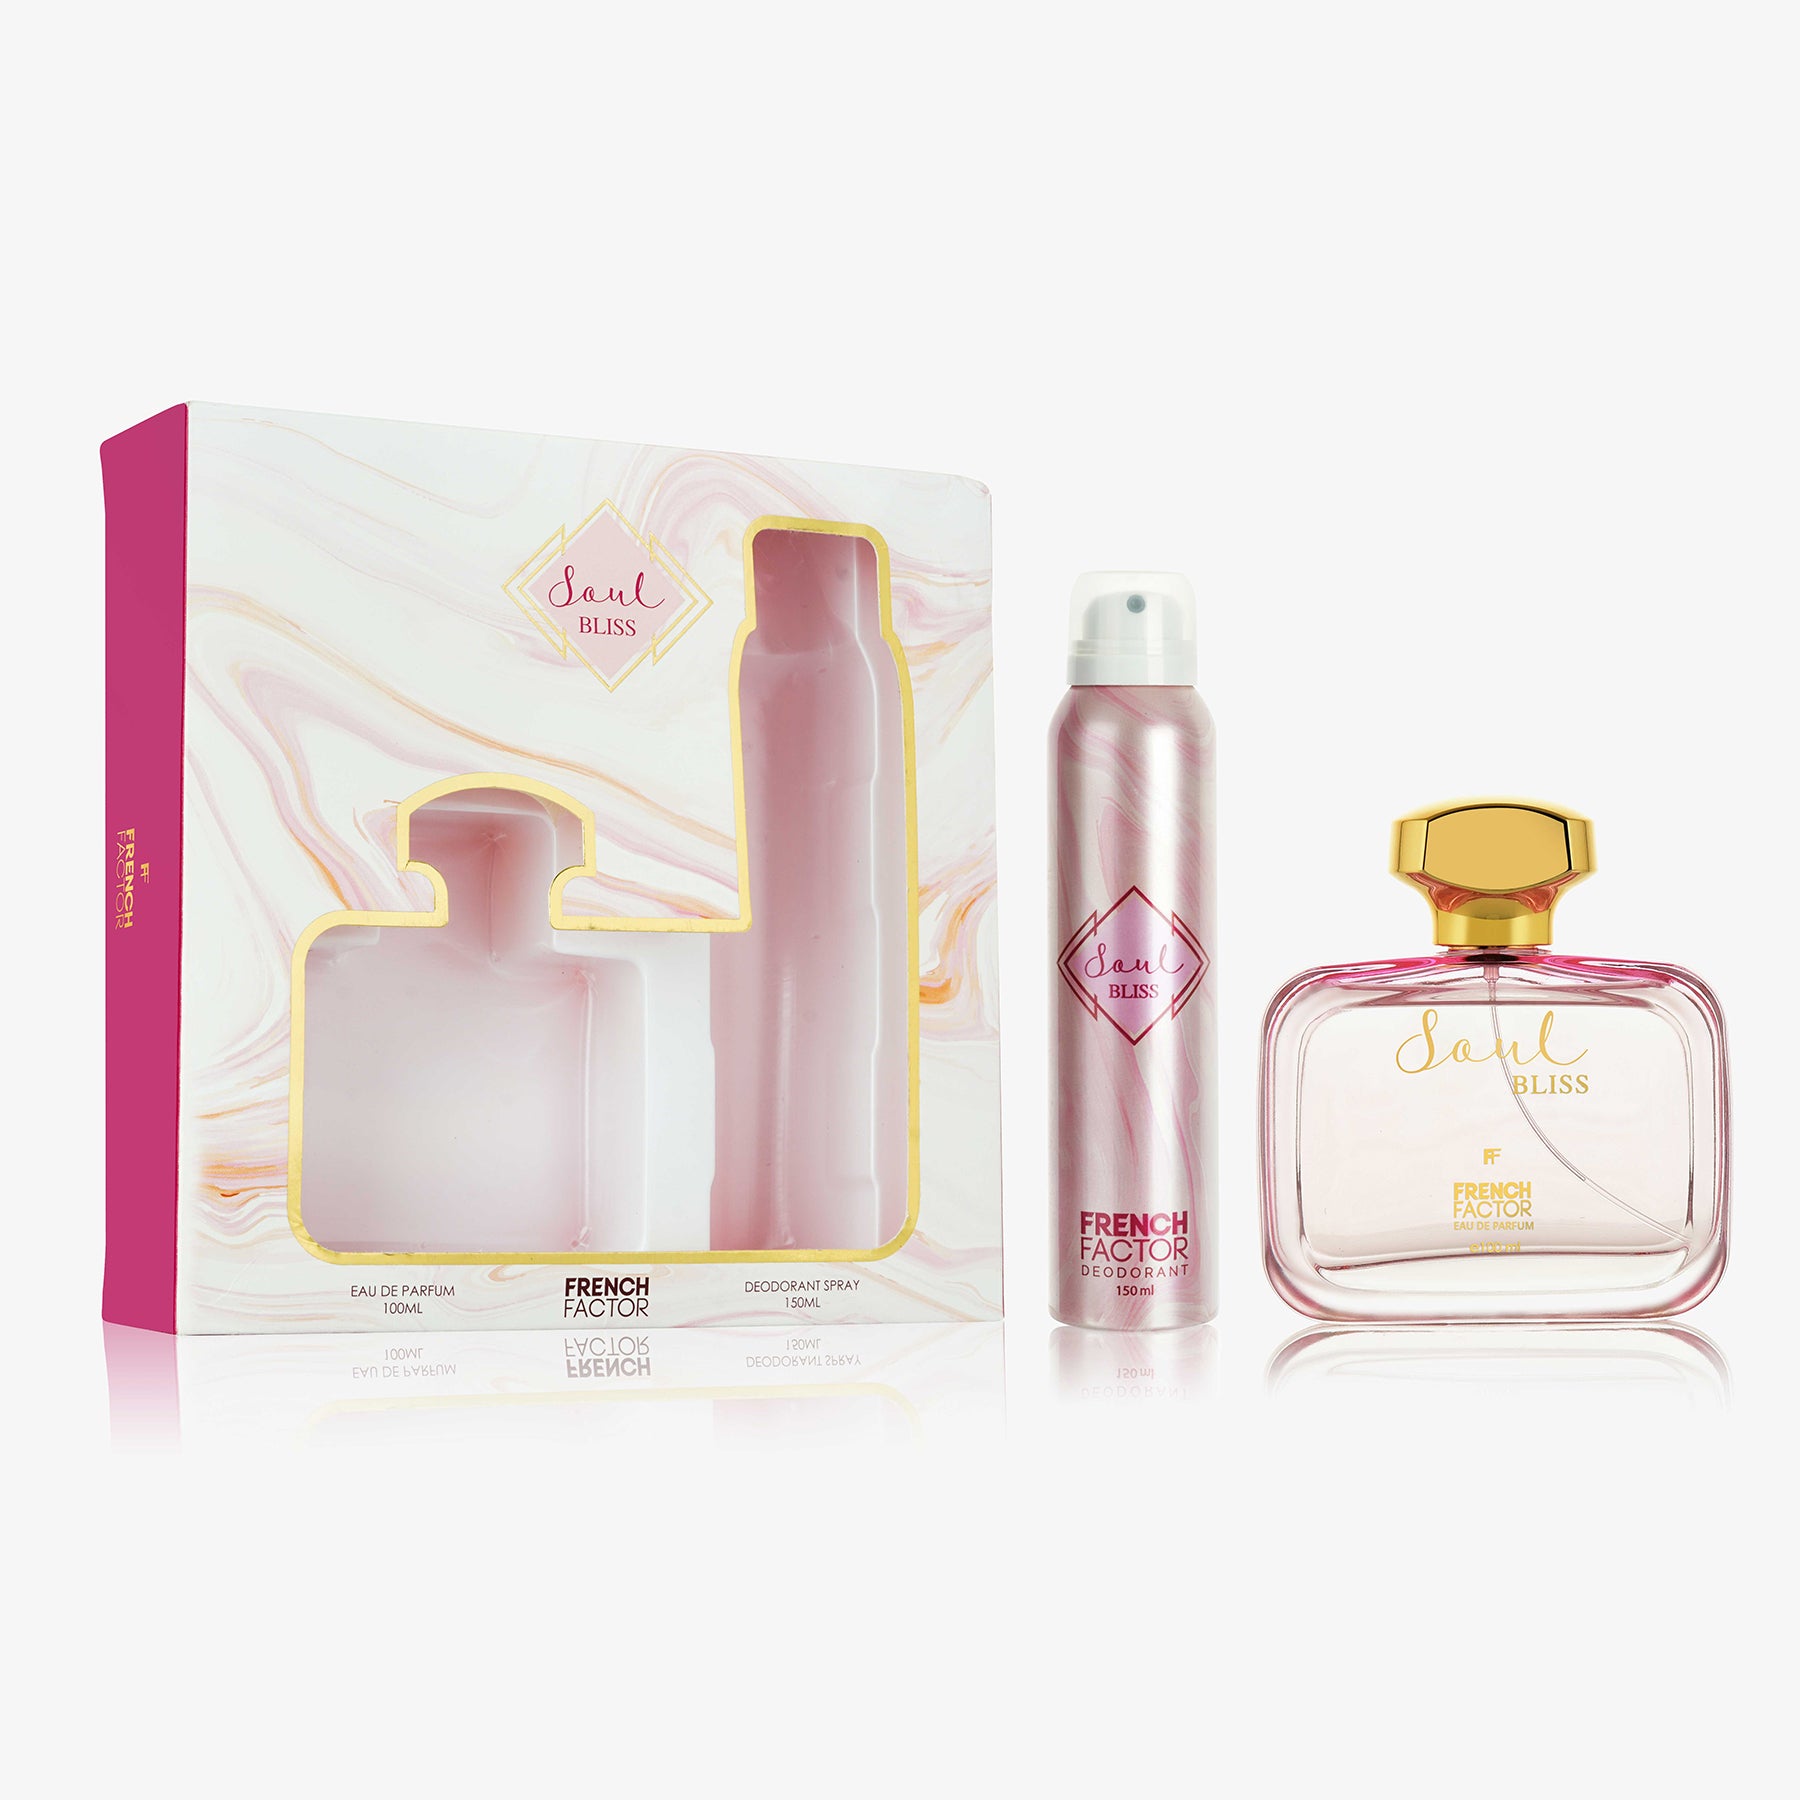 Perfume Gift Sets - Buy Best Perfume Fragrance Gift Sets – French Factor